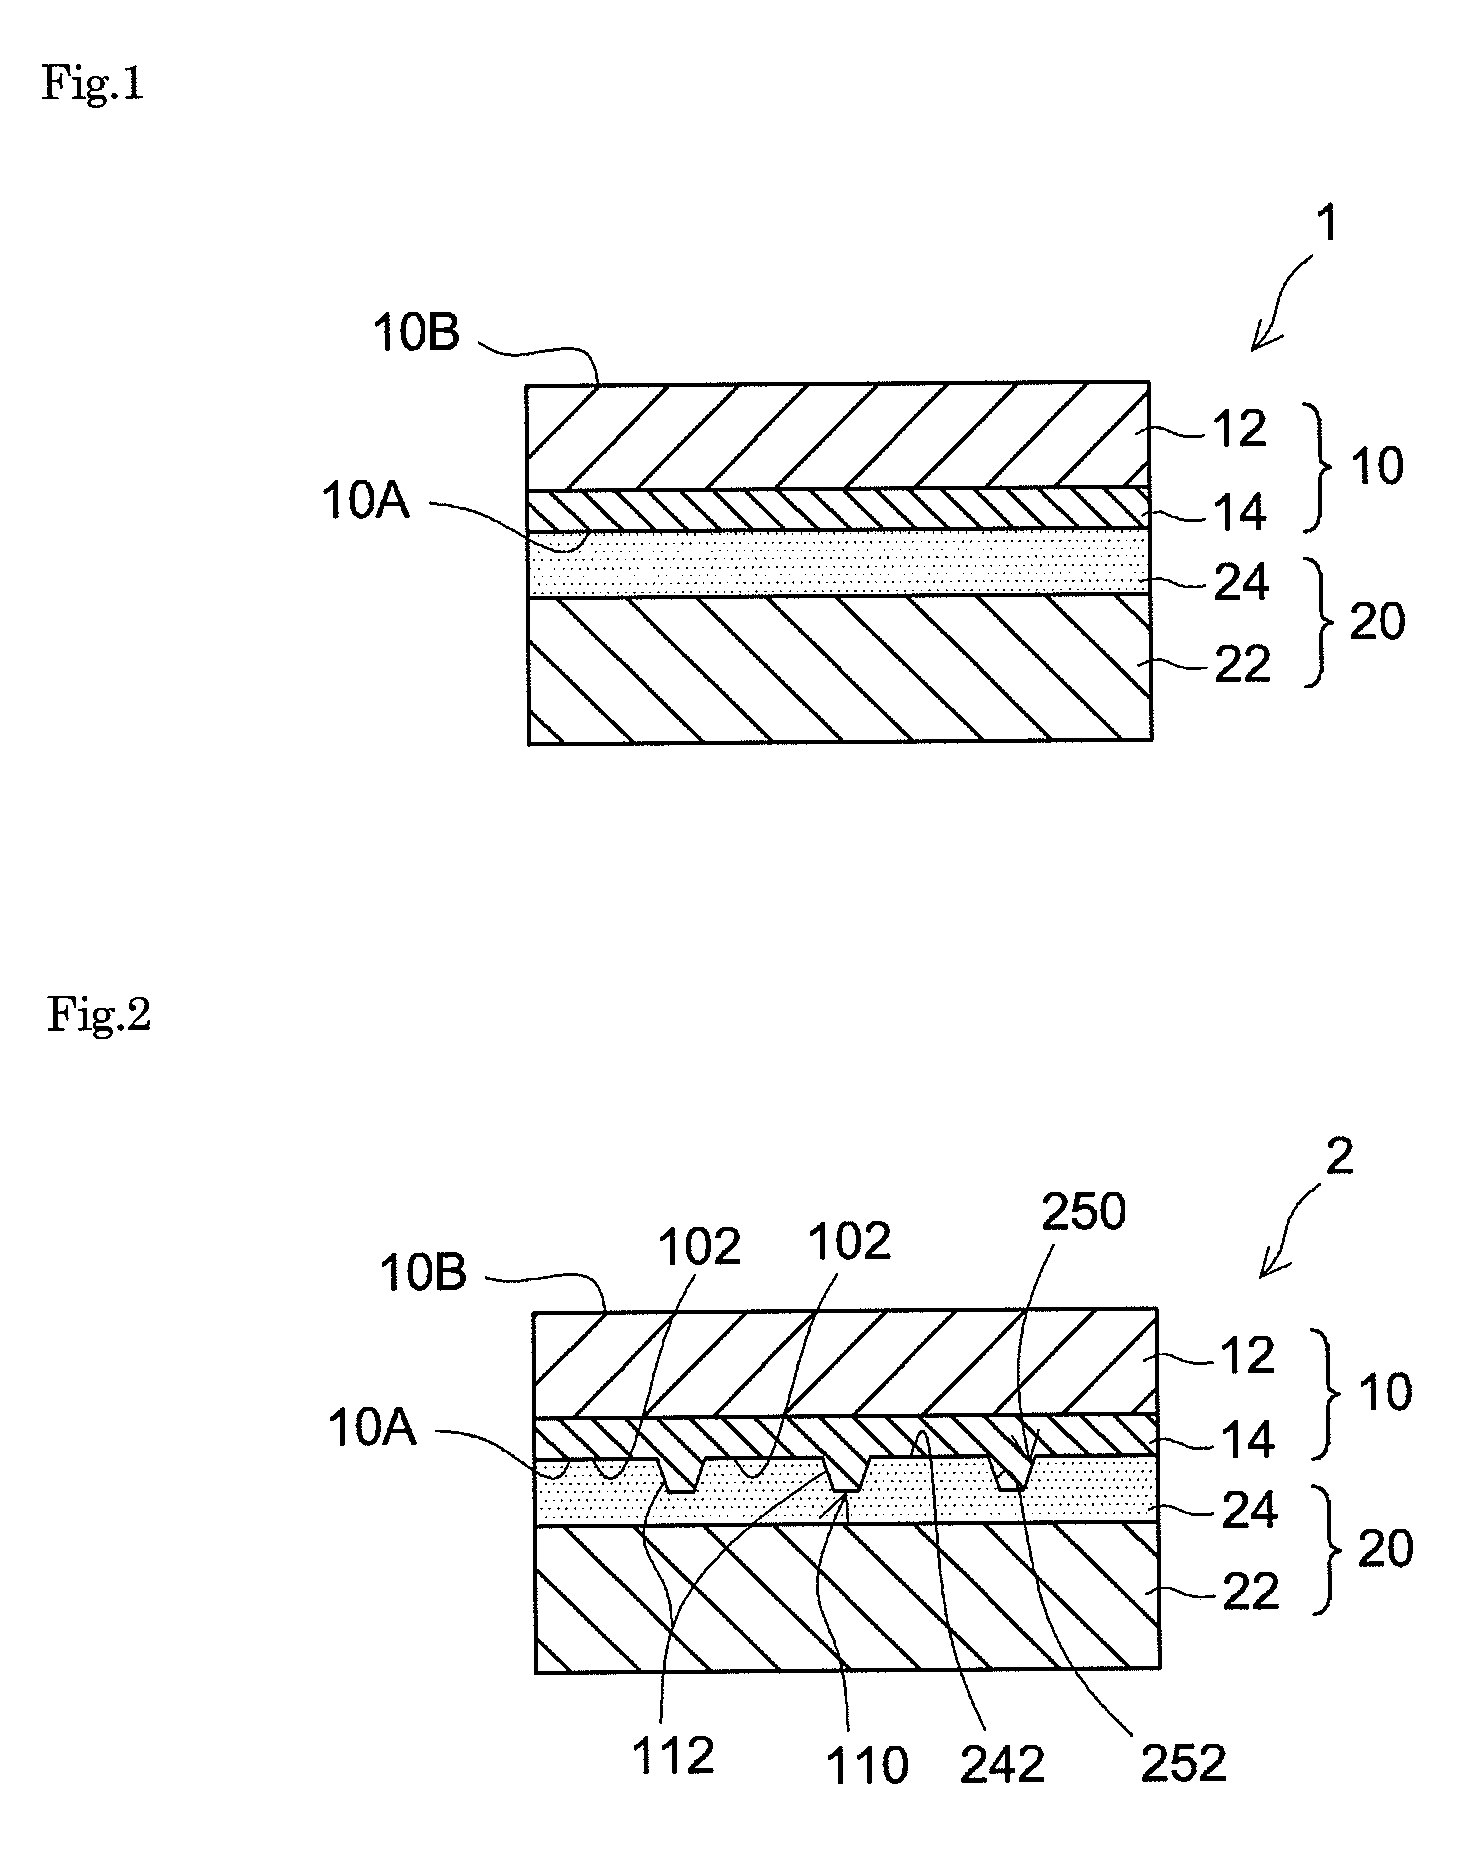 Pressure-sensitive adhesive sheet with release liner